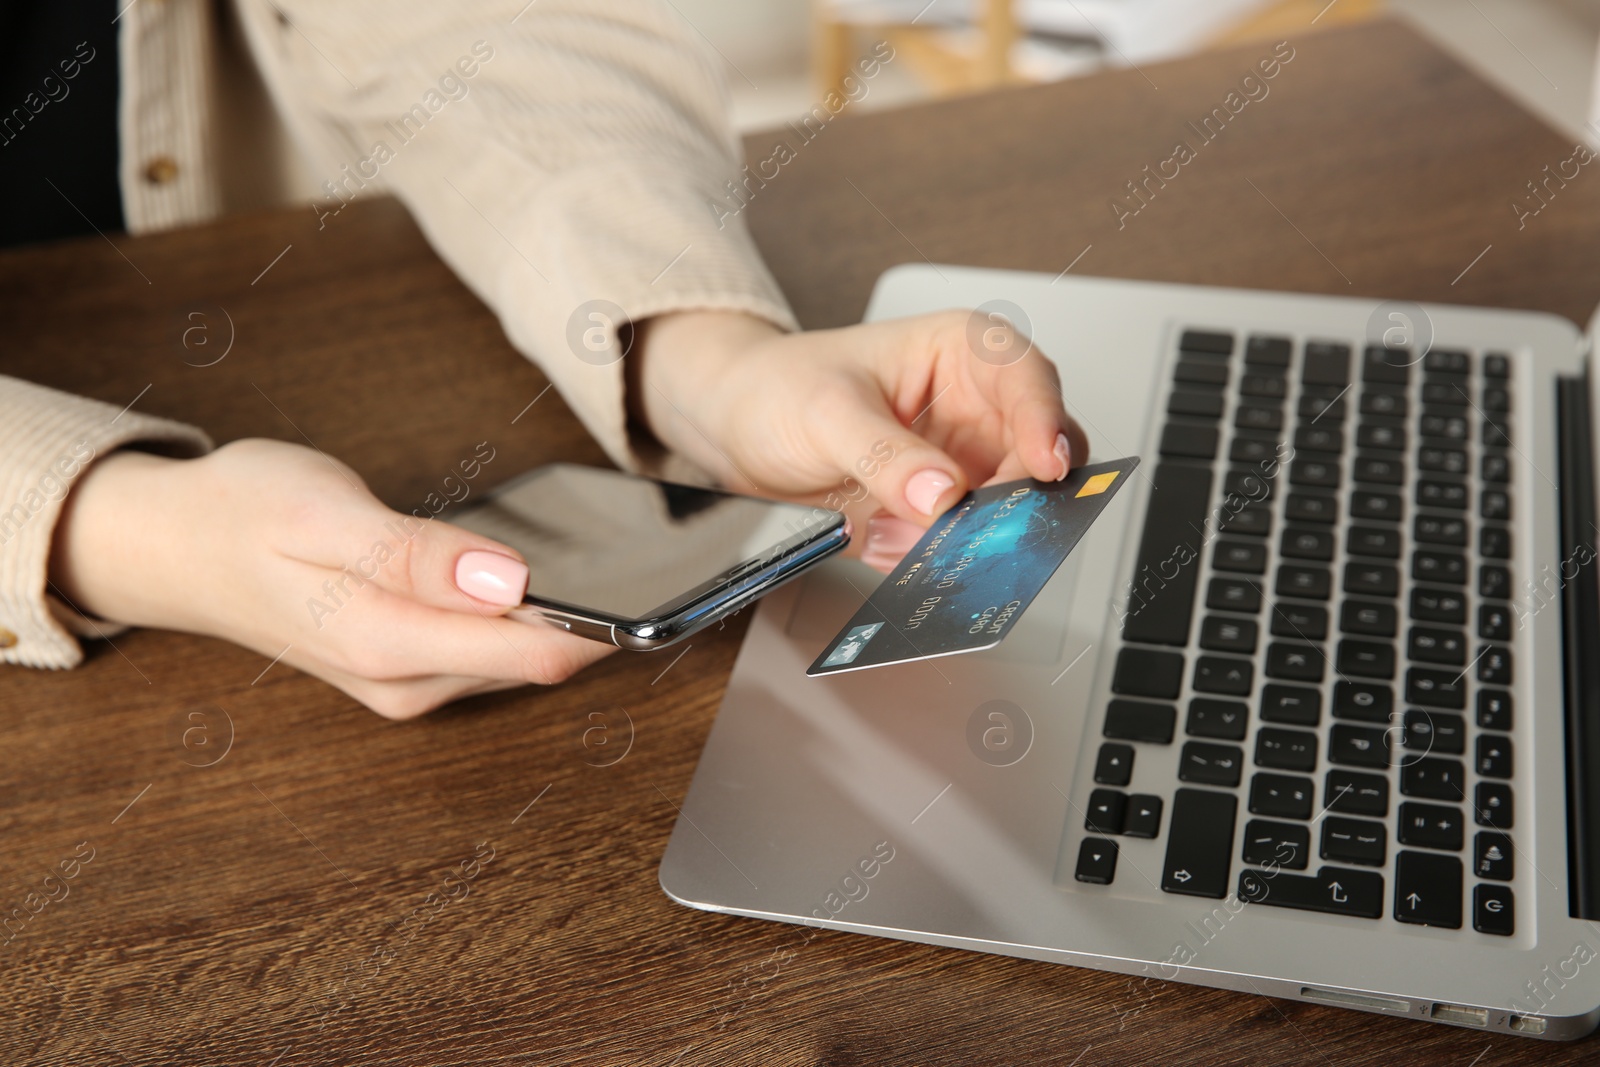 Photo of Online payment. Woman using smartphone and credit card near laptop at wooden table indoors, closeup